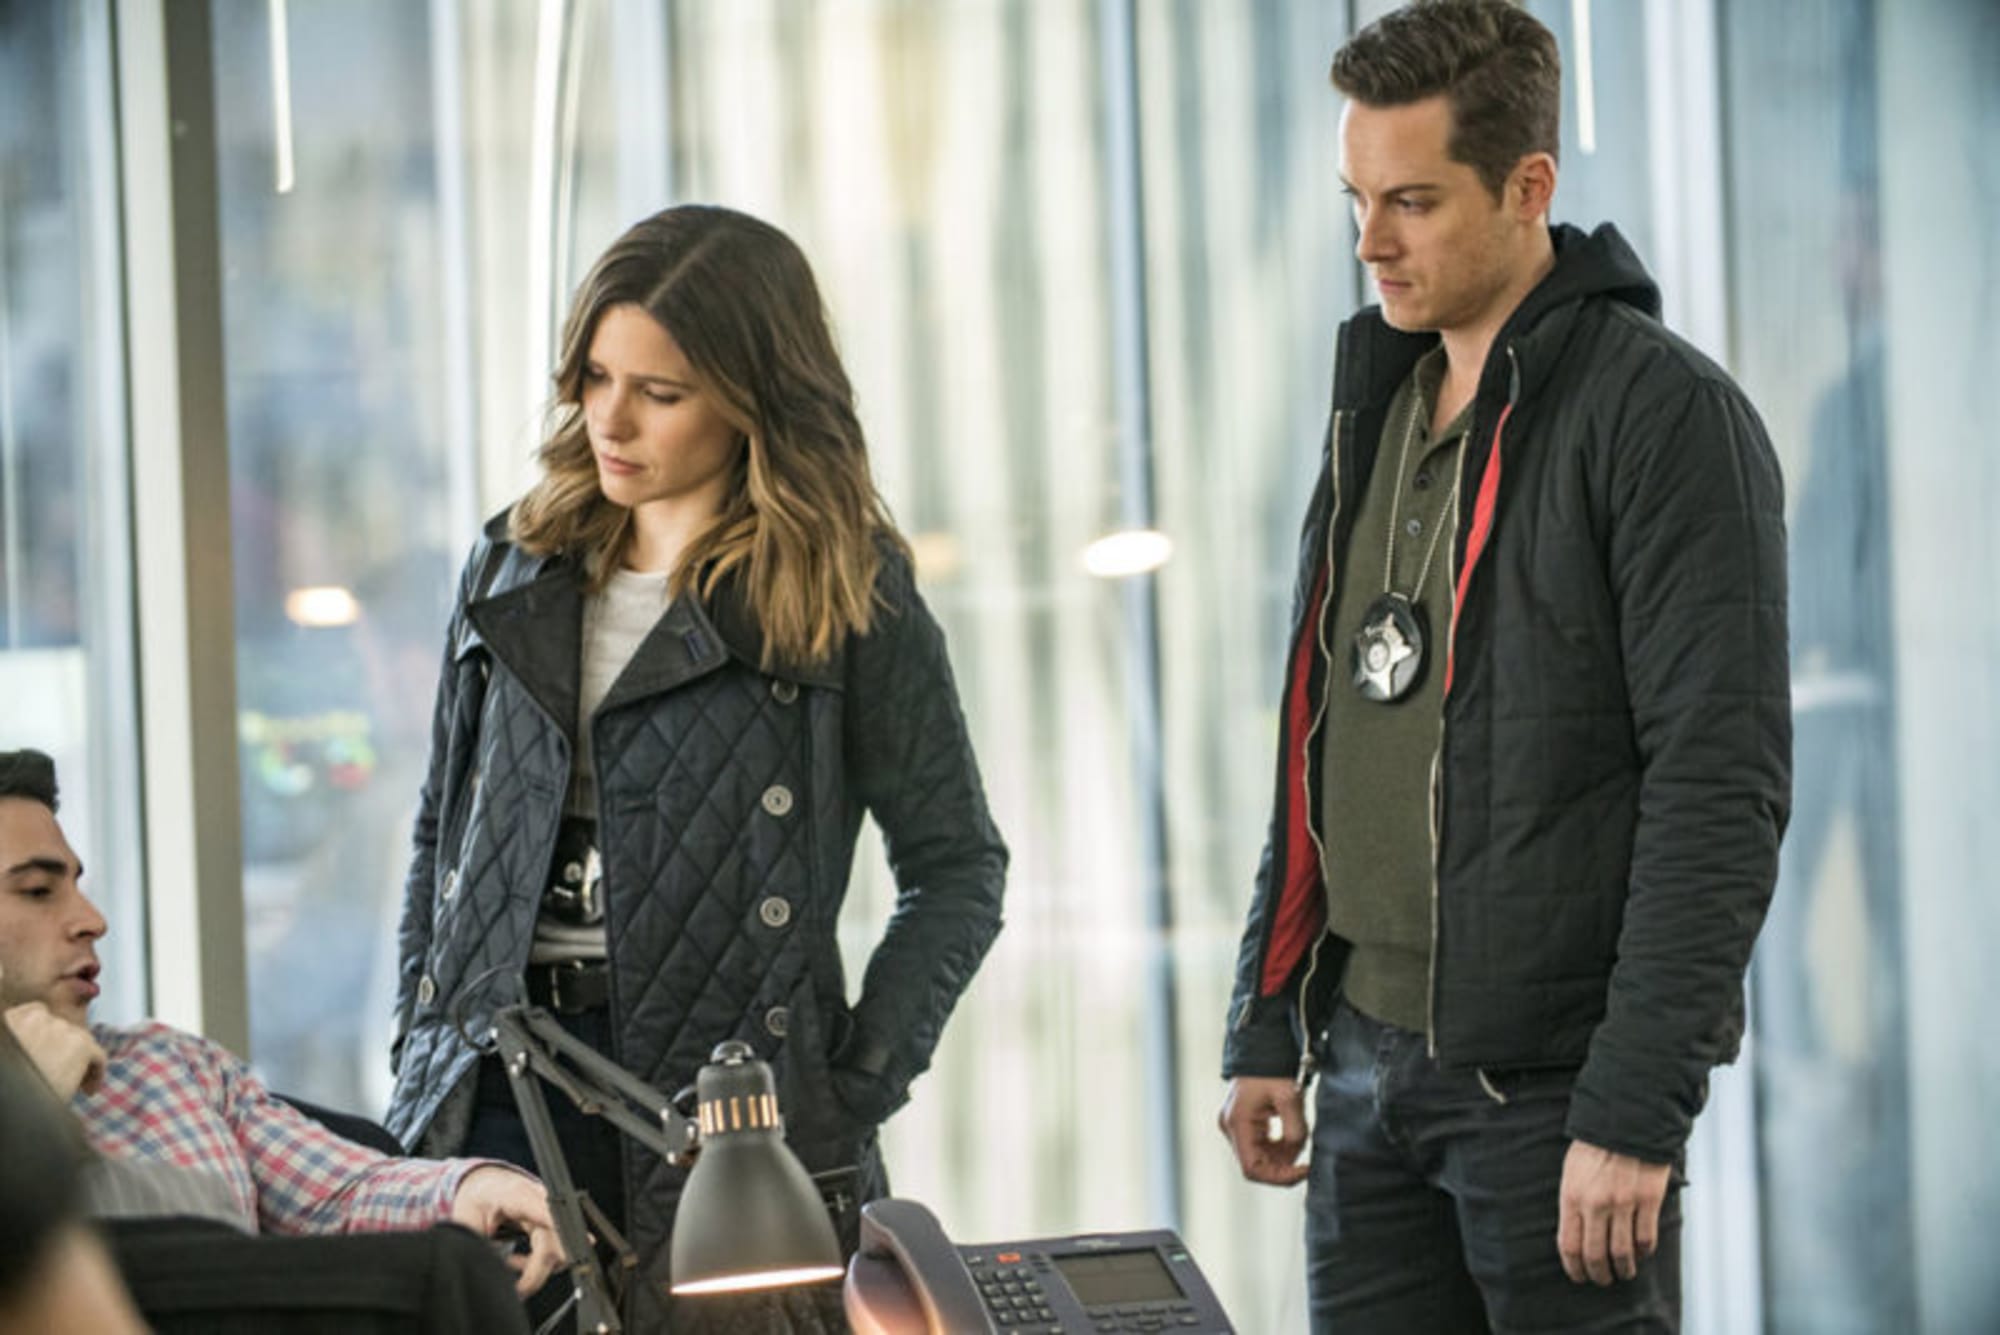 Nbc Releases Linstead Deleted Scene From This Weeks Chicago Pd 